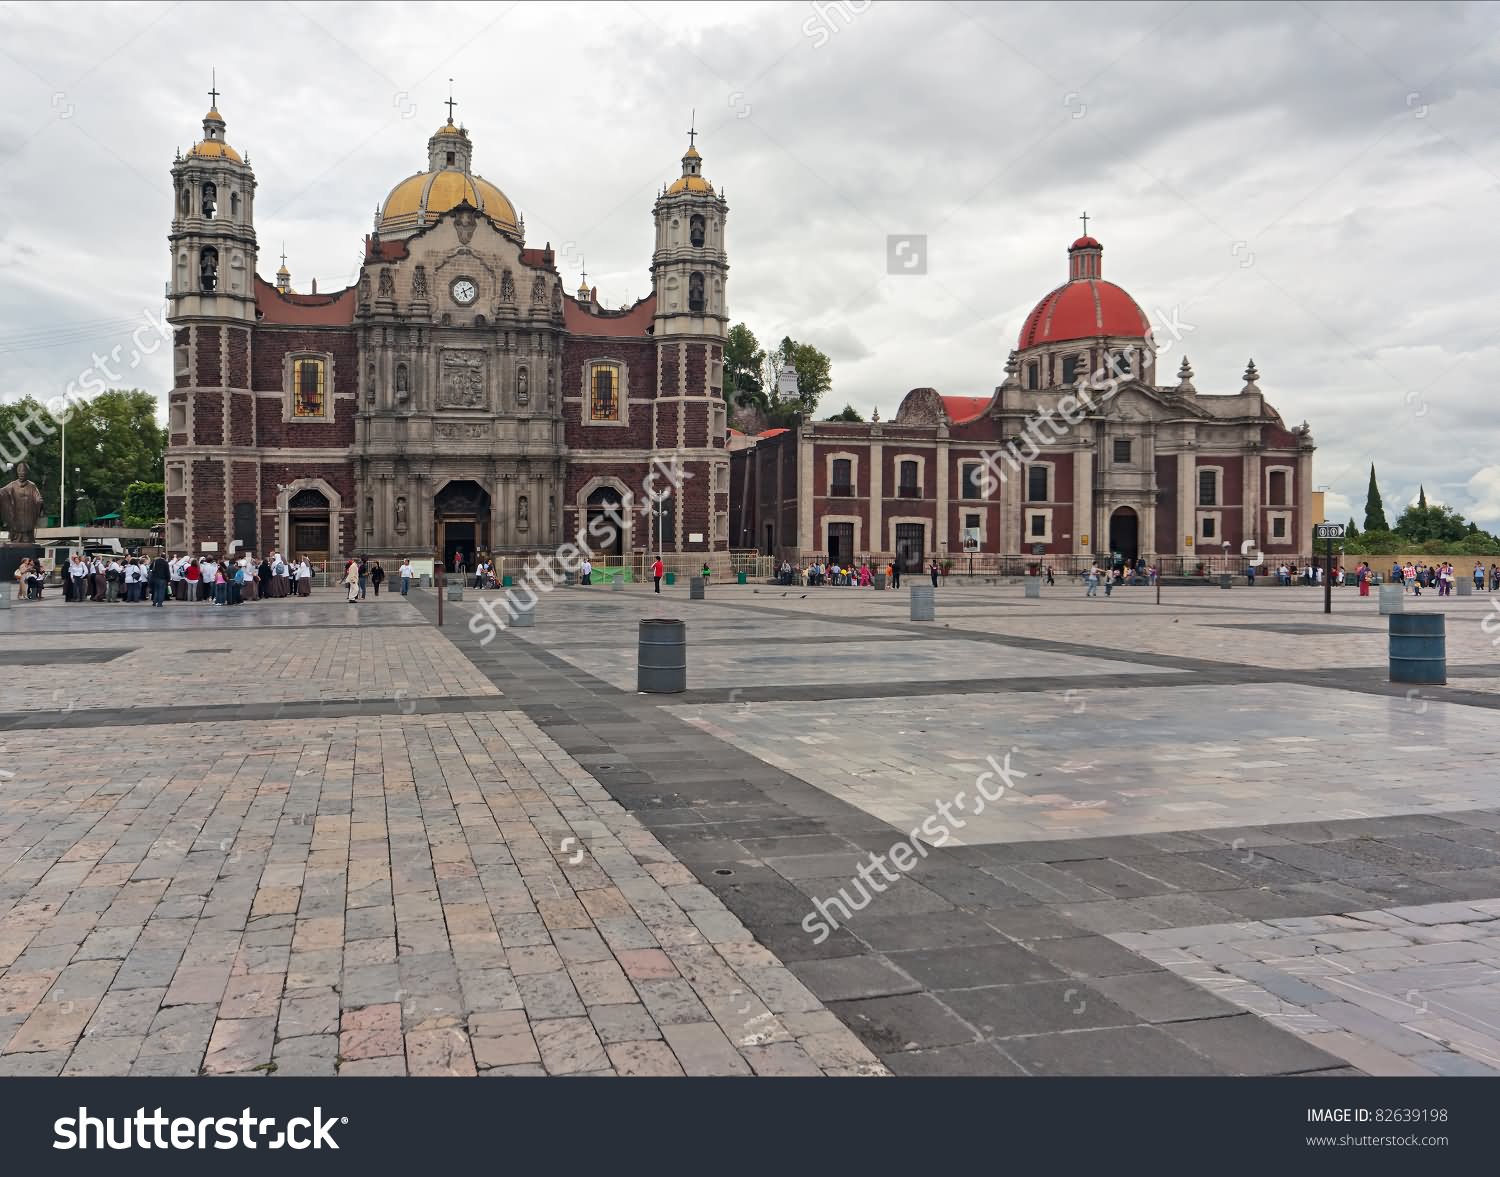 Basilica of Our Lady of Guadalupe In Mexico City